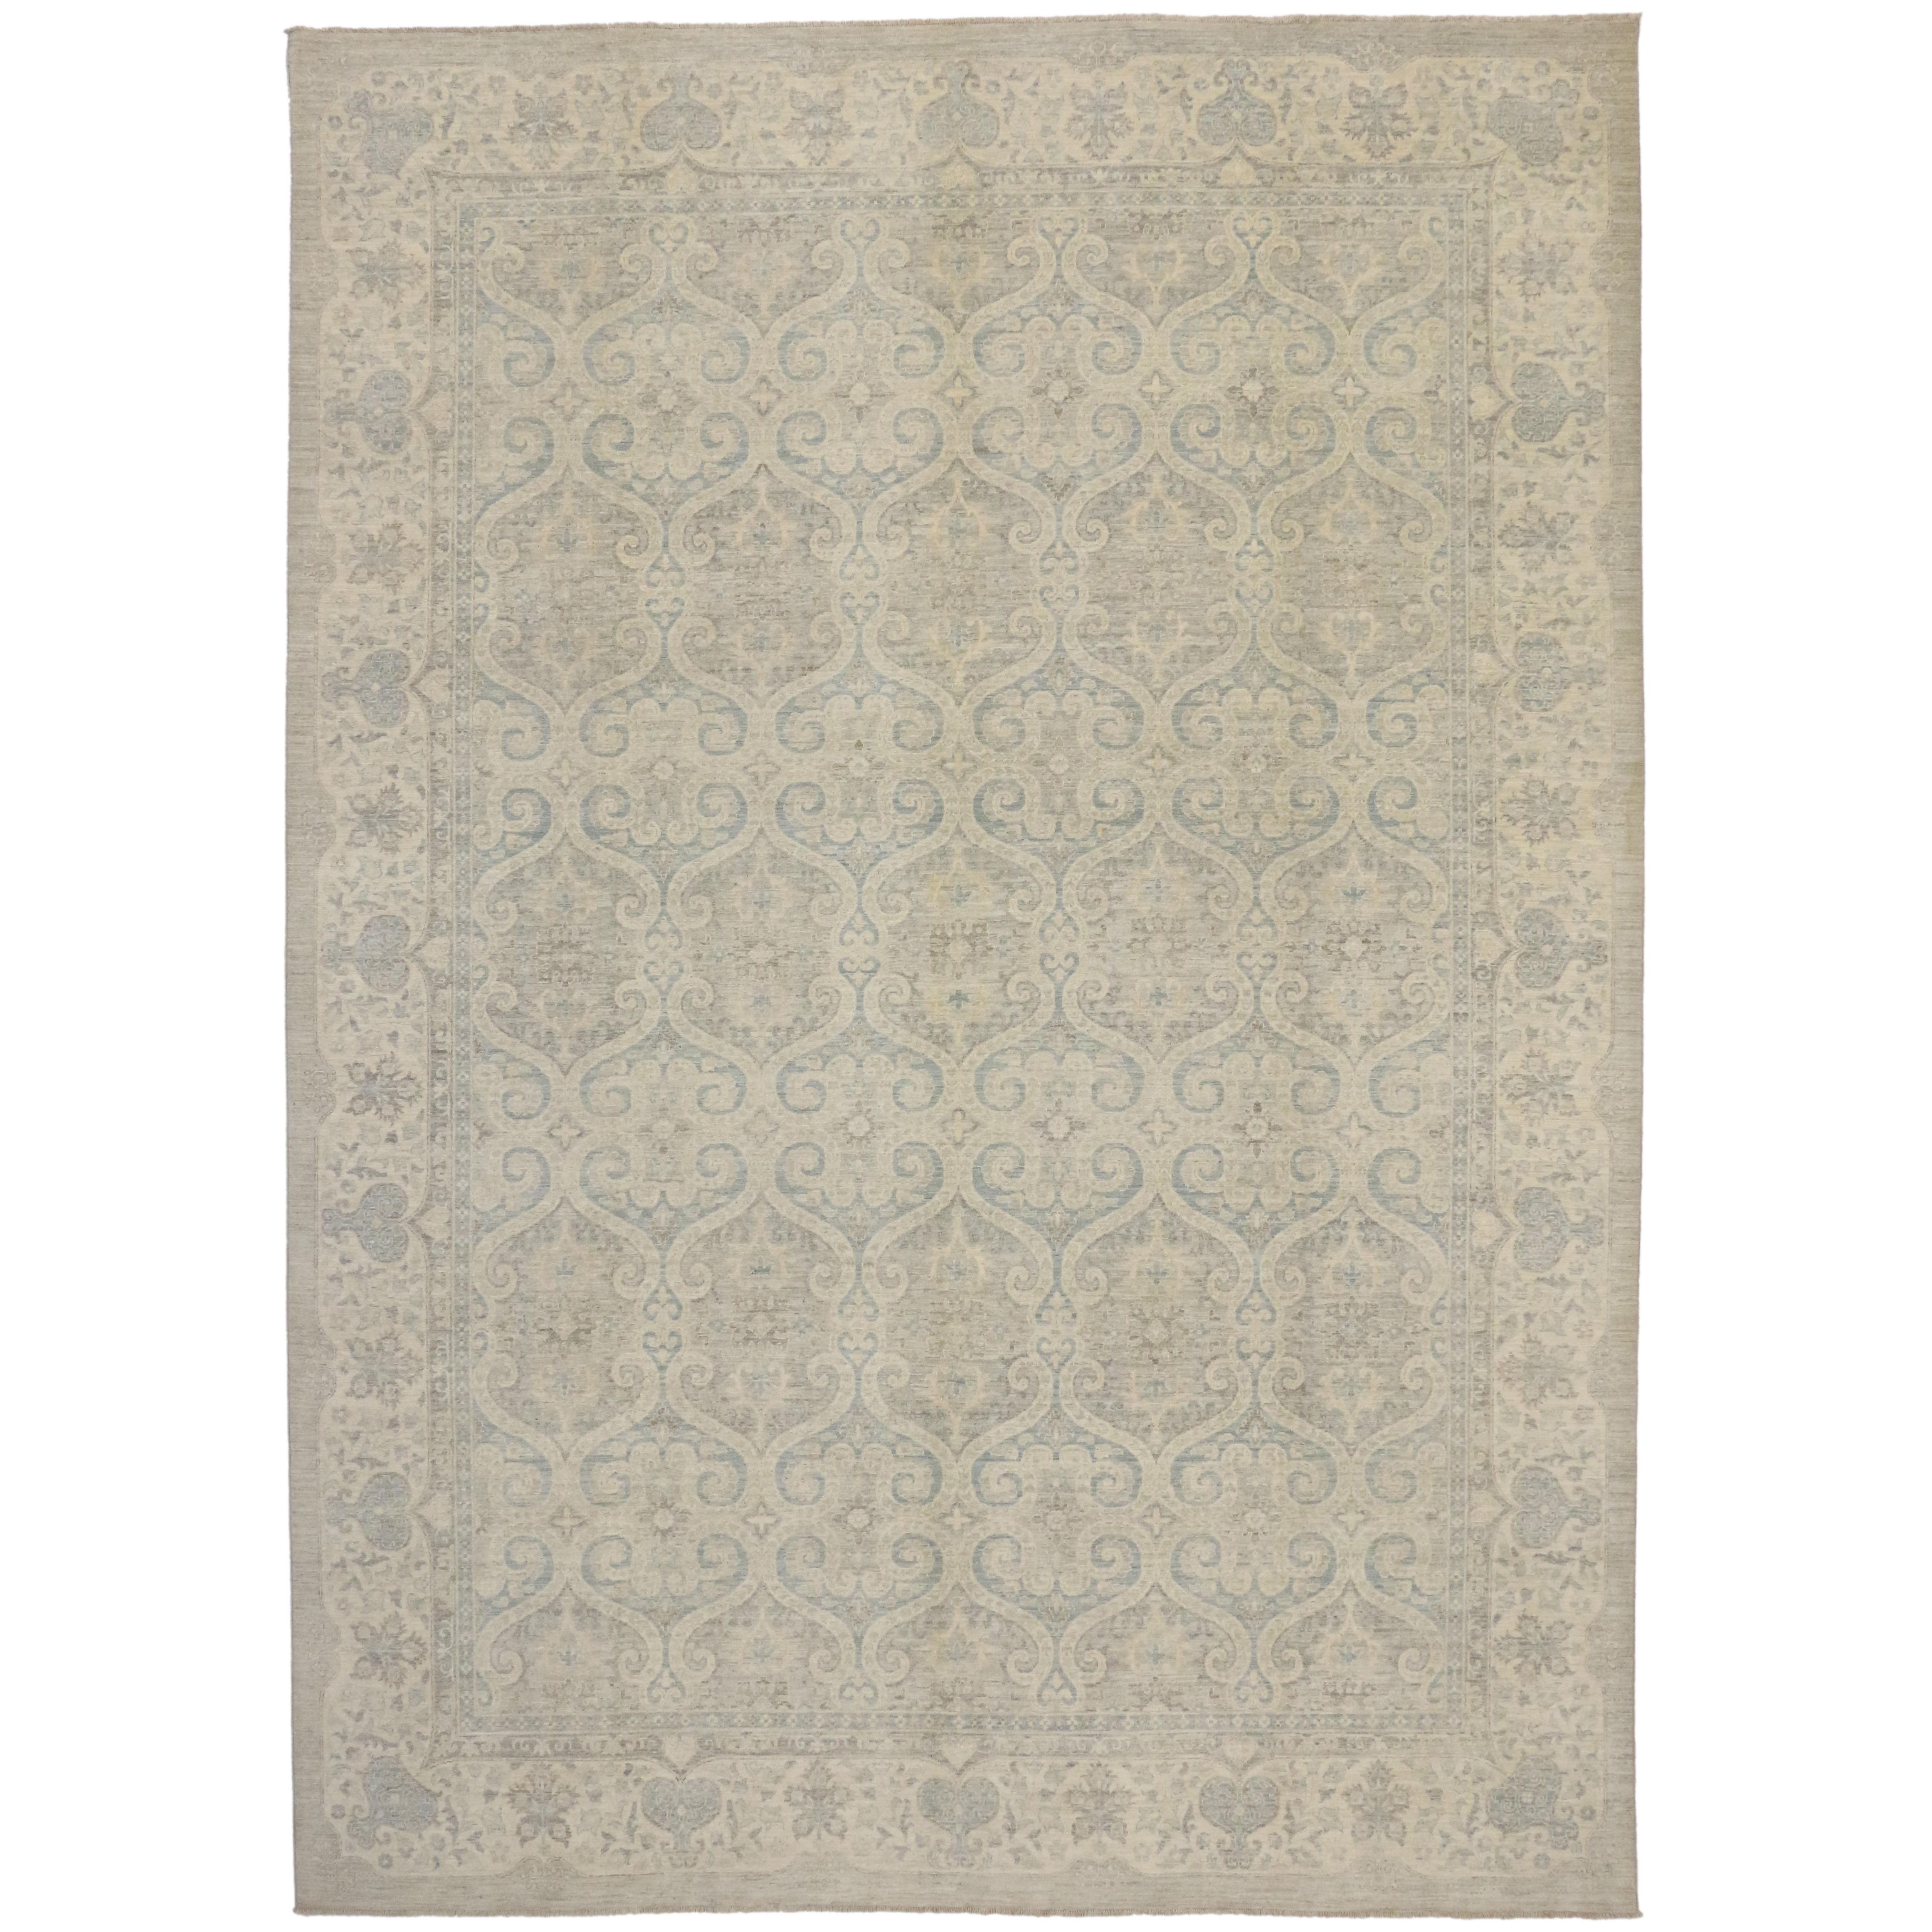 New Transitional Area Rug with French Cottage Style in Neutral Coastal Colors